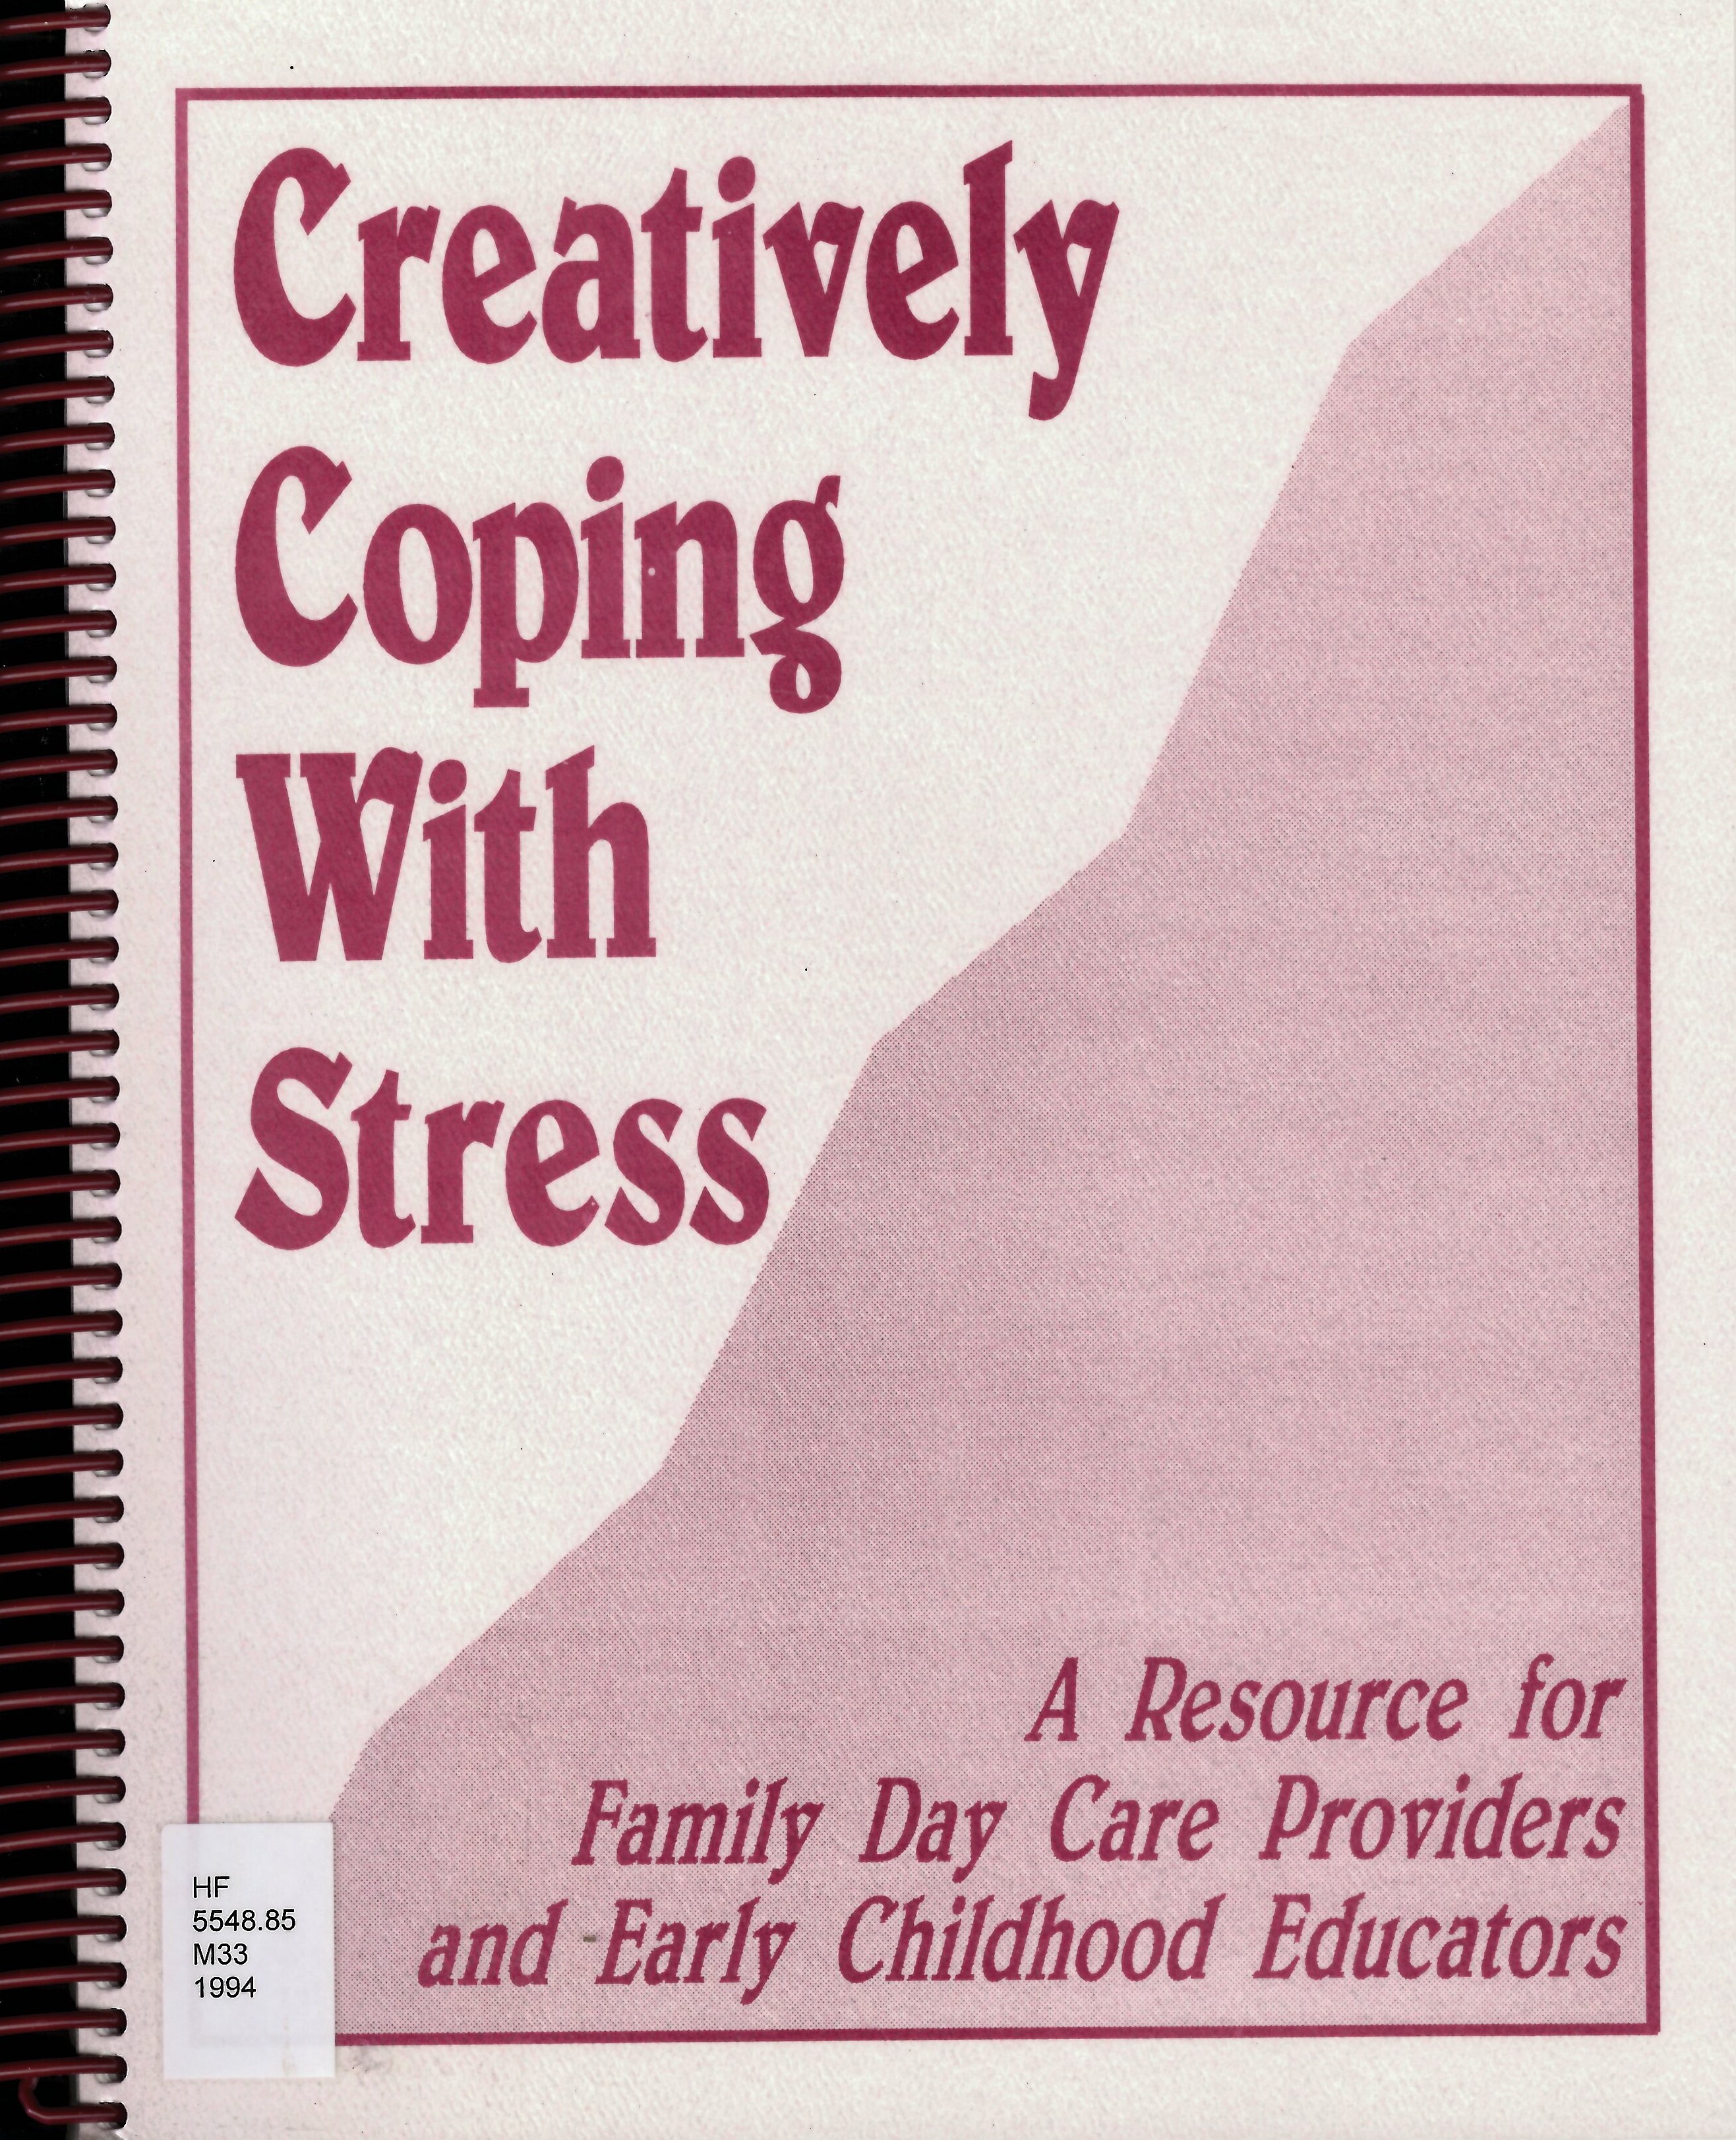 Creatively coping with stress : a resource for family day care providers and early childhood educators